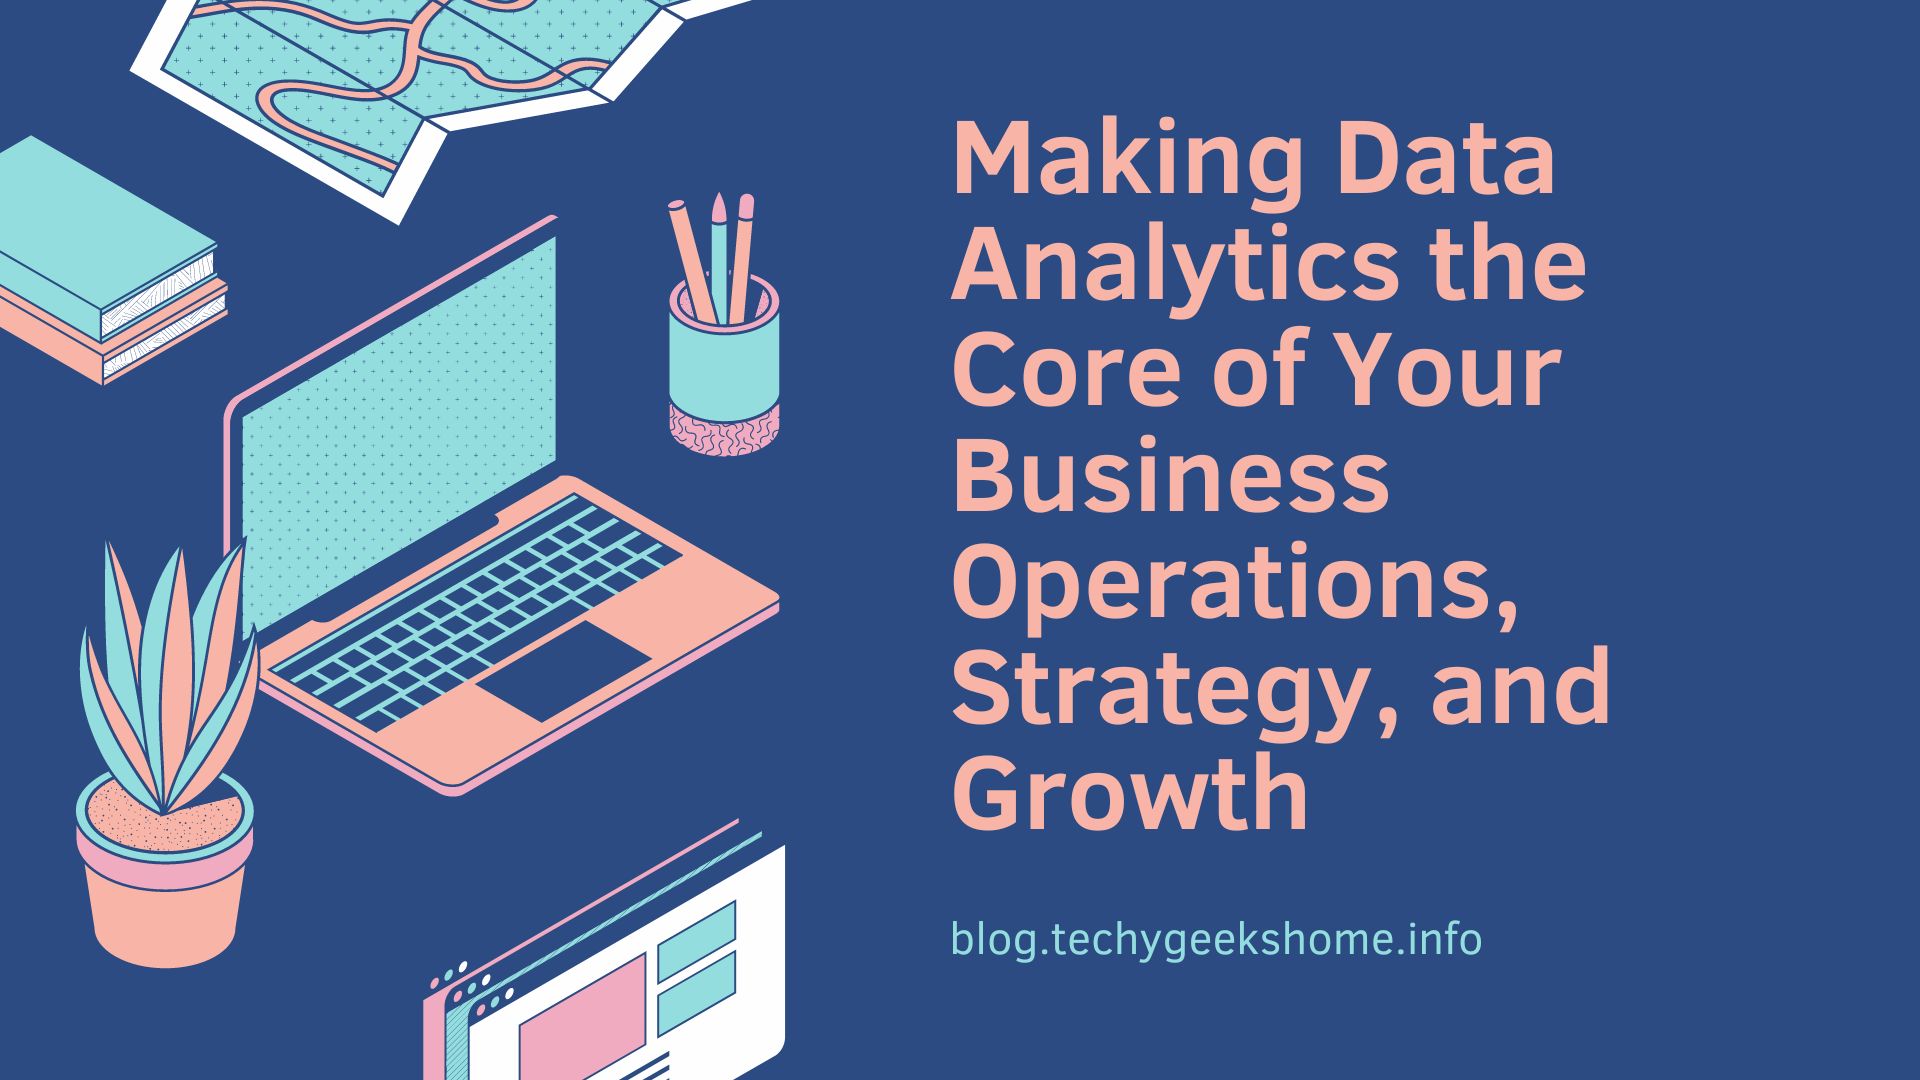 Making Data Analytics the Core of Your Business Operations, Strategy, and Growth